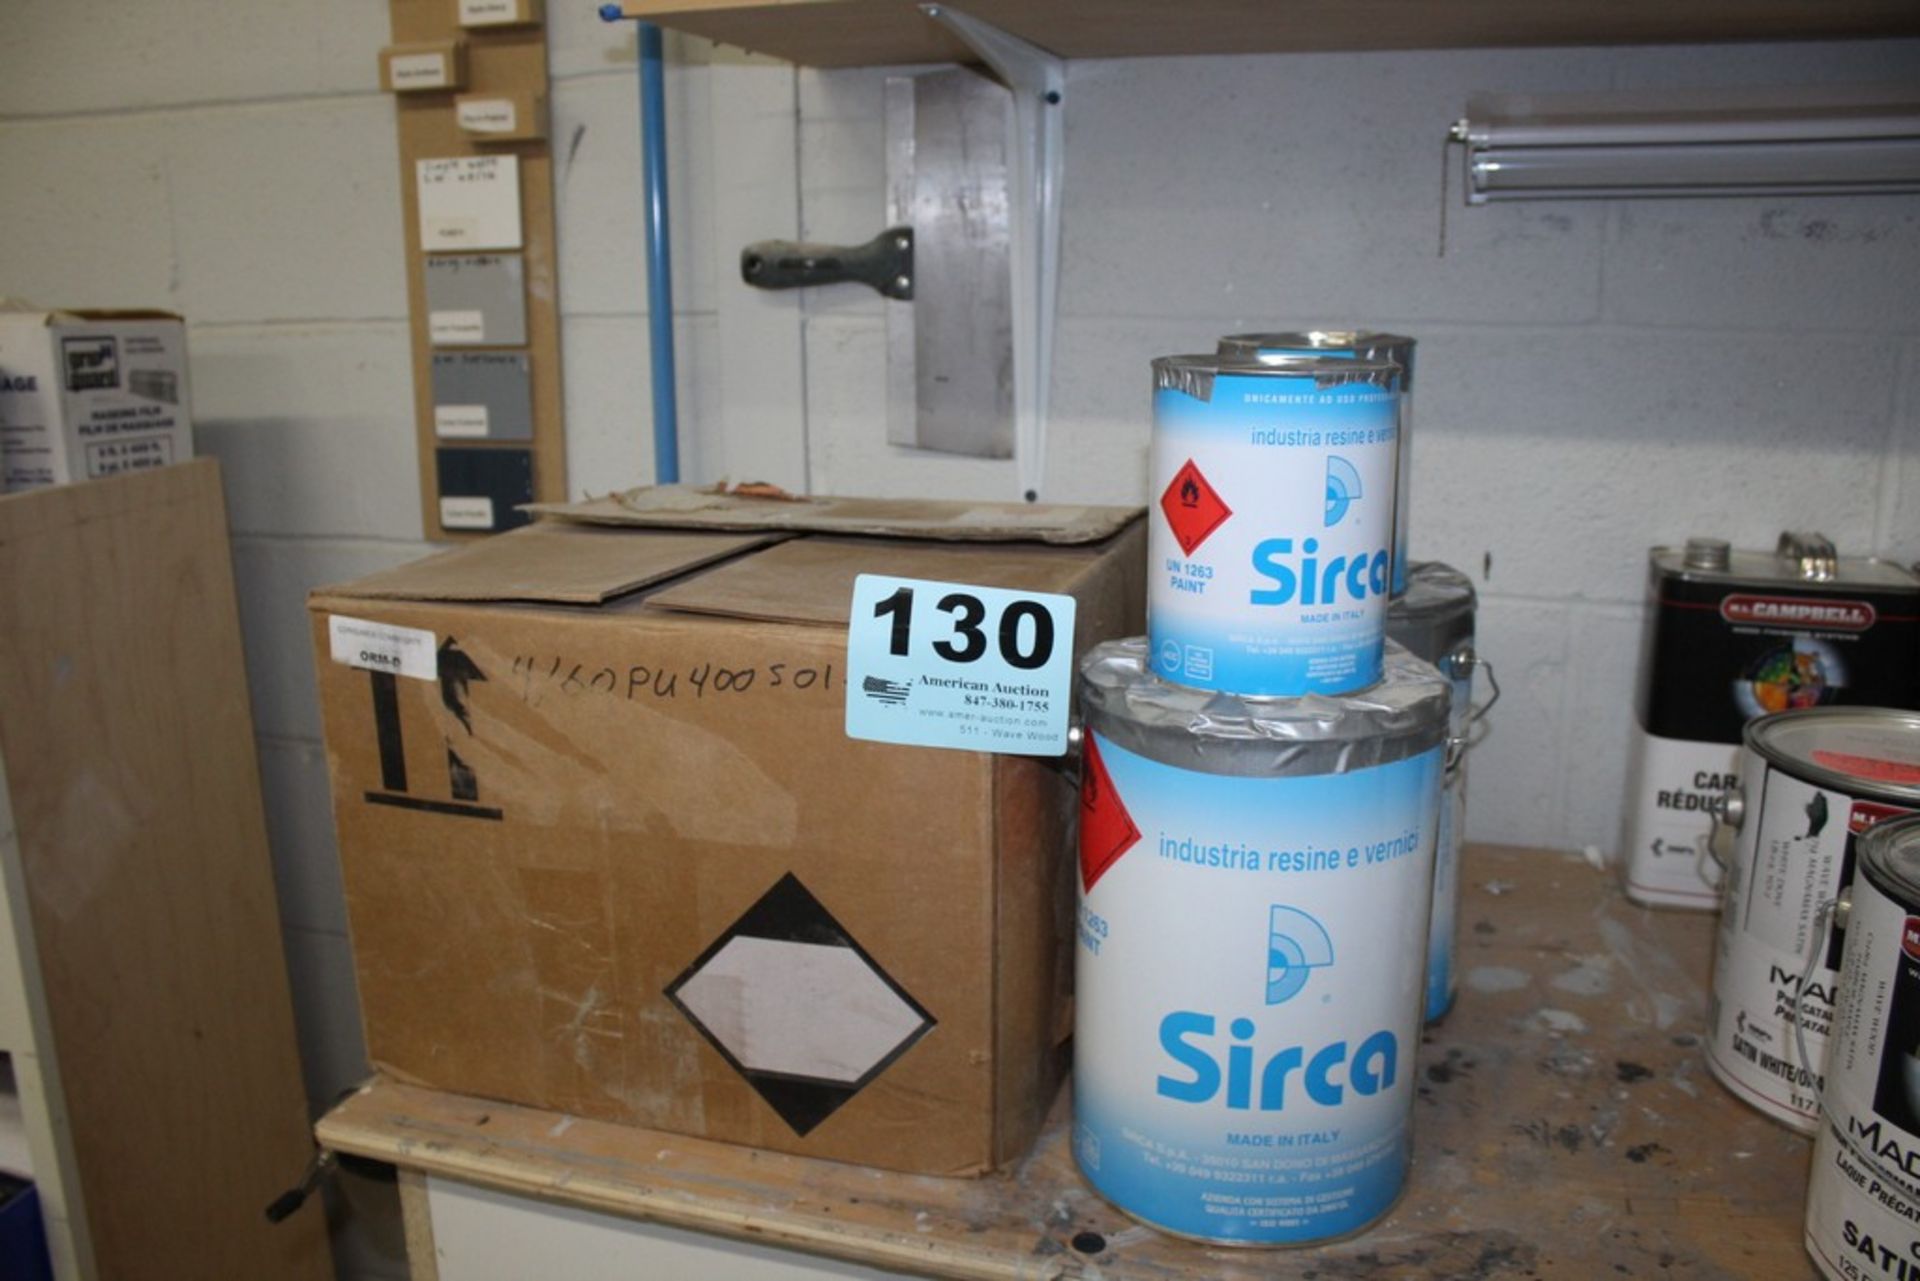 (4) GALLONS OF SIRCA PAINT AND SMALL CANS